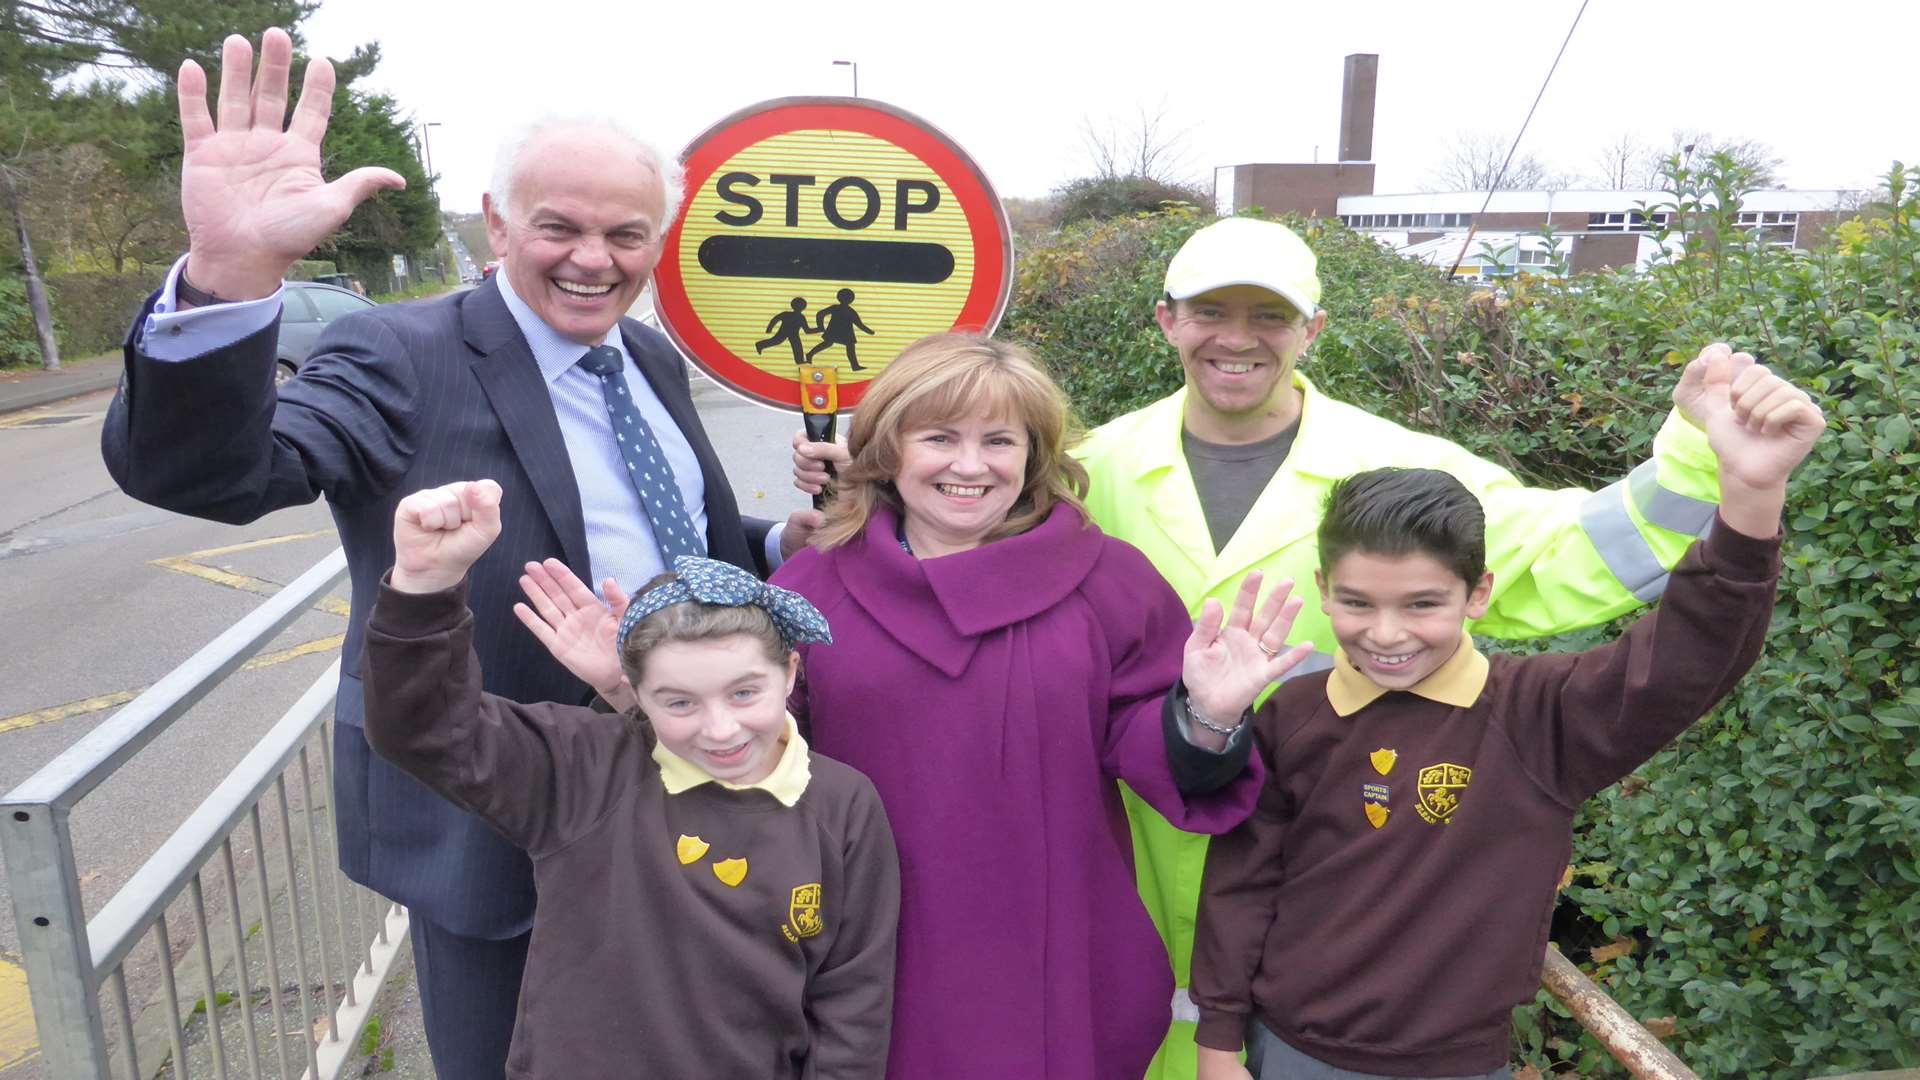 Cllr Clive Pearman of KCC, lollipop man Nick Foreman and Blean Primary head teacher Lynn Lawrence with pupils Theo Panteli and Keira Padamsee, both 10, announce new category of Best Road Crossing Patrol for annual KM Walk to School Awards which are open for nominations.